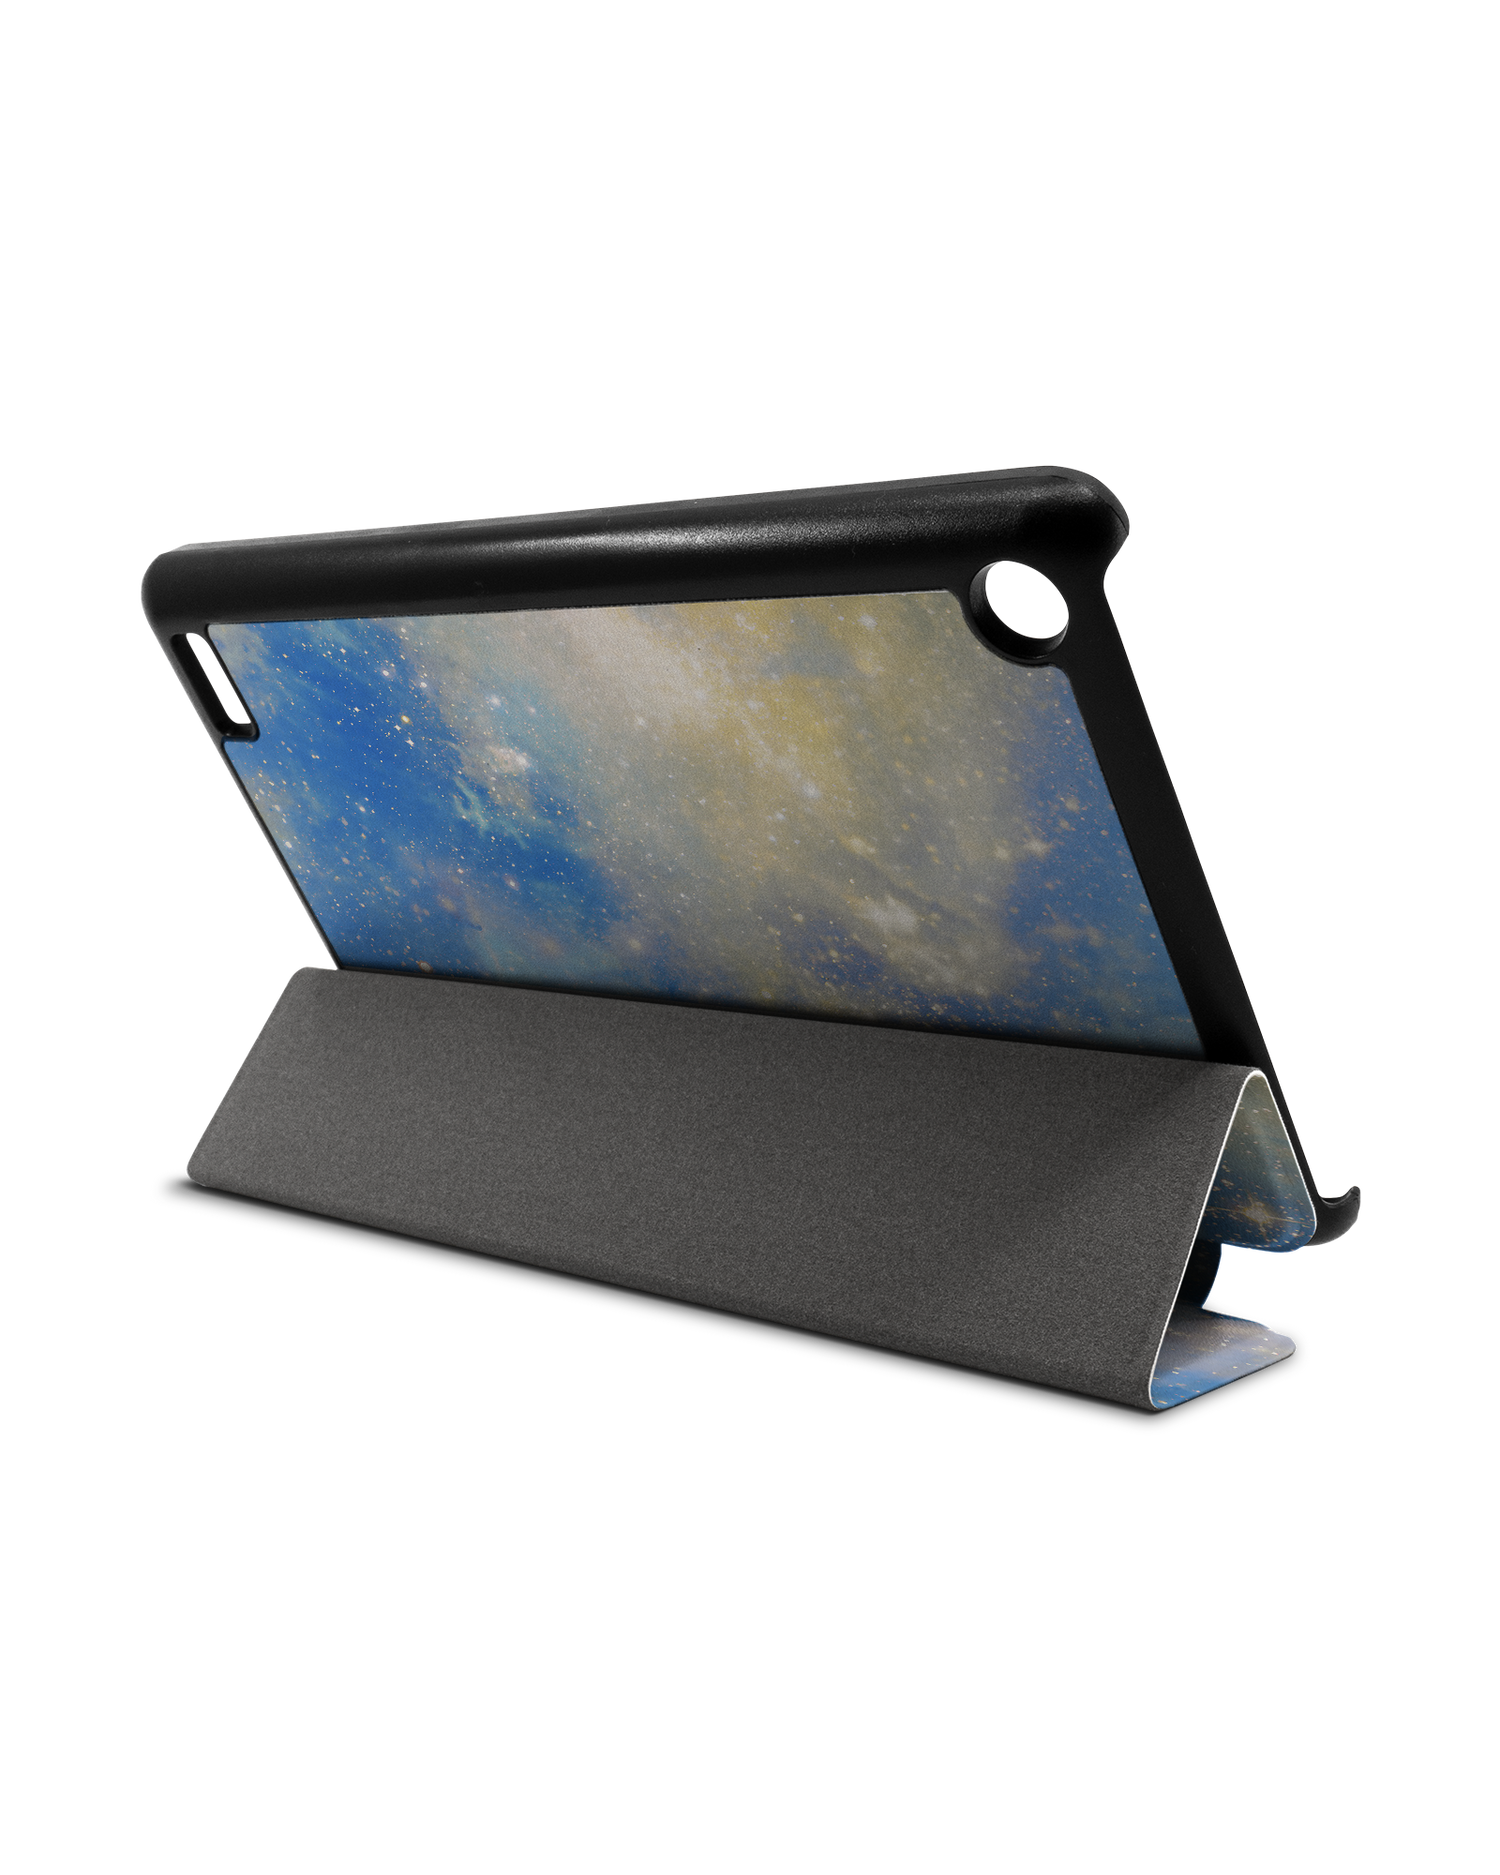 Spaced Out Tablet Smart Case for Amazon Fire 7: Used as Stand